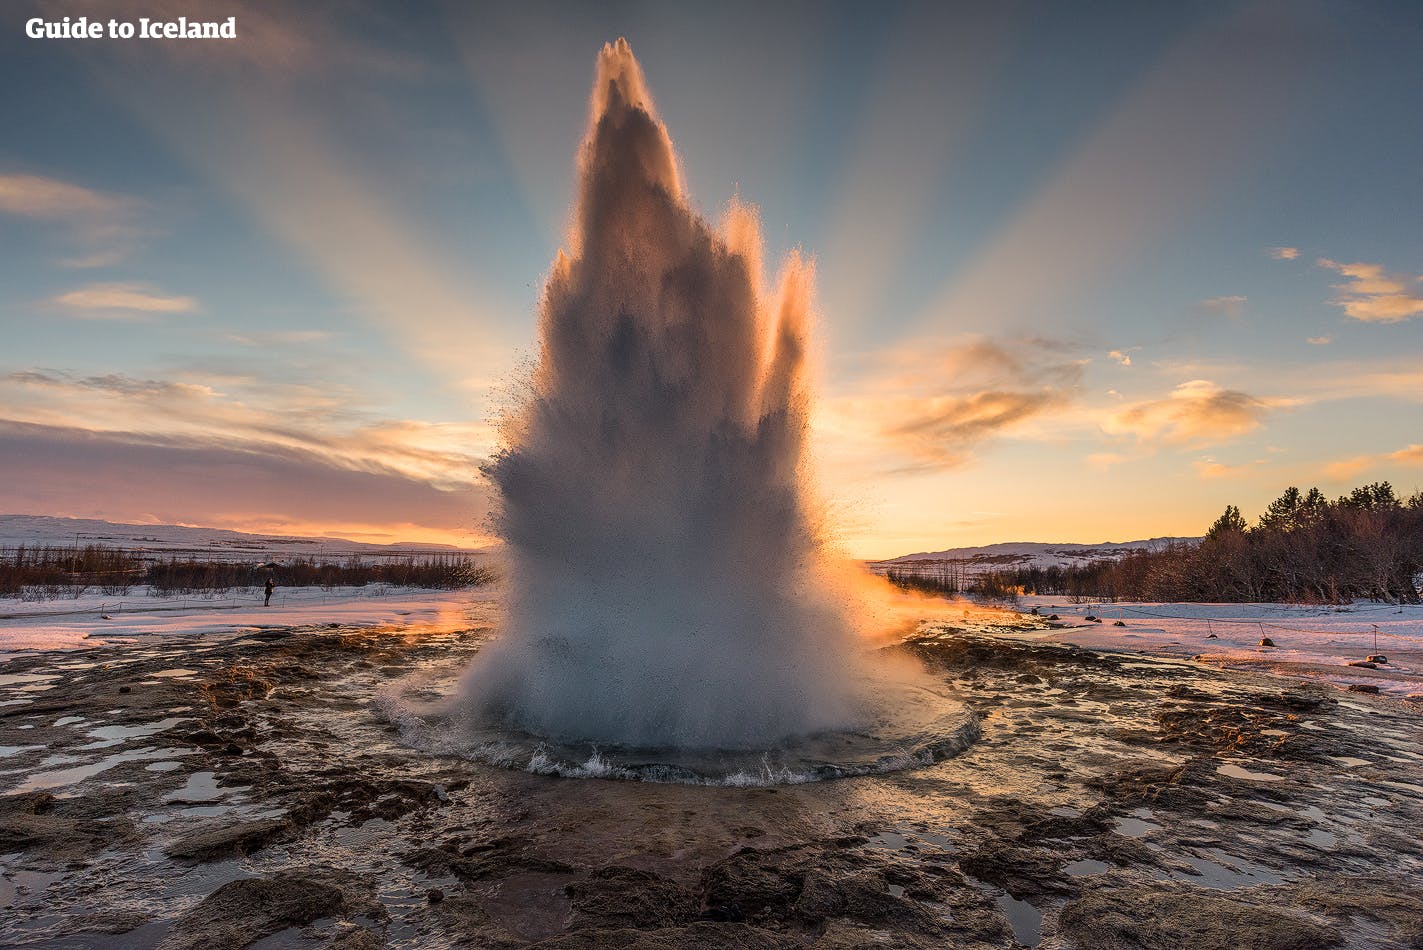 Visit the Golden Circle and see the geyser Strokkur erupt in a large water column.